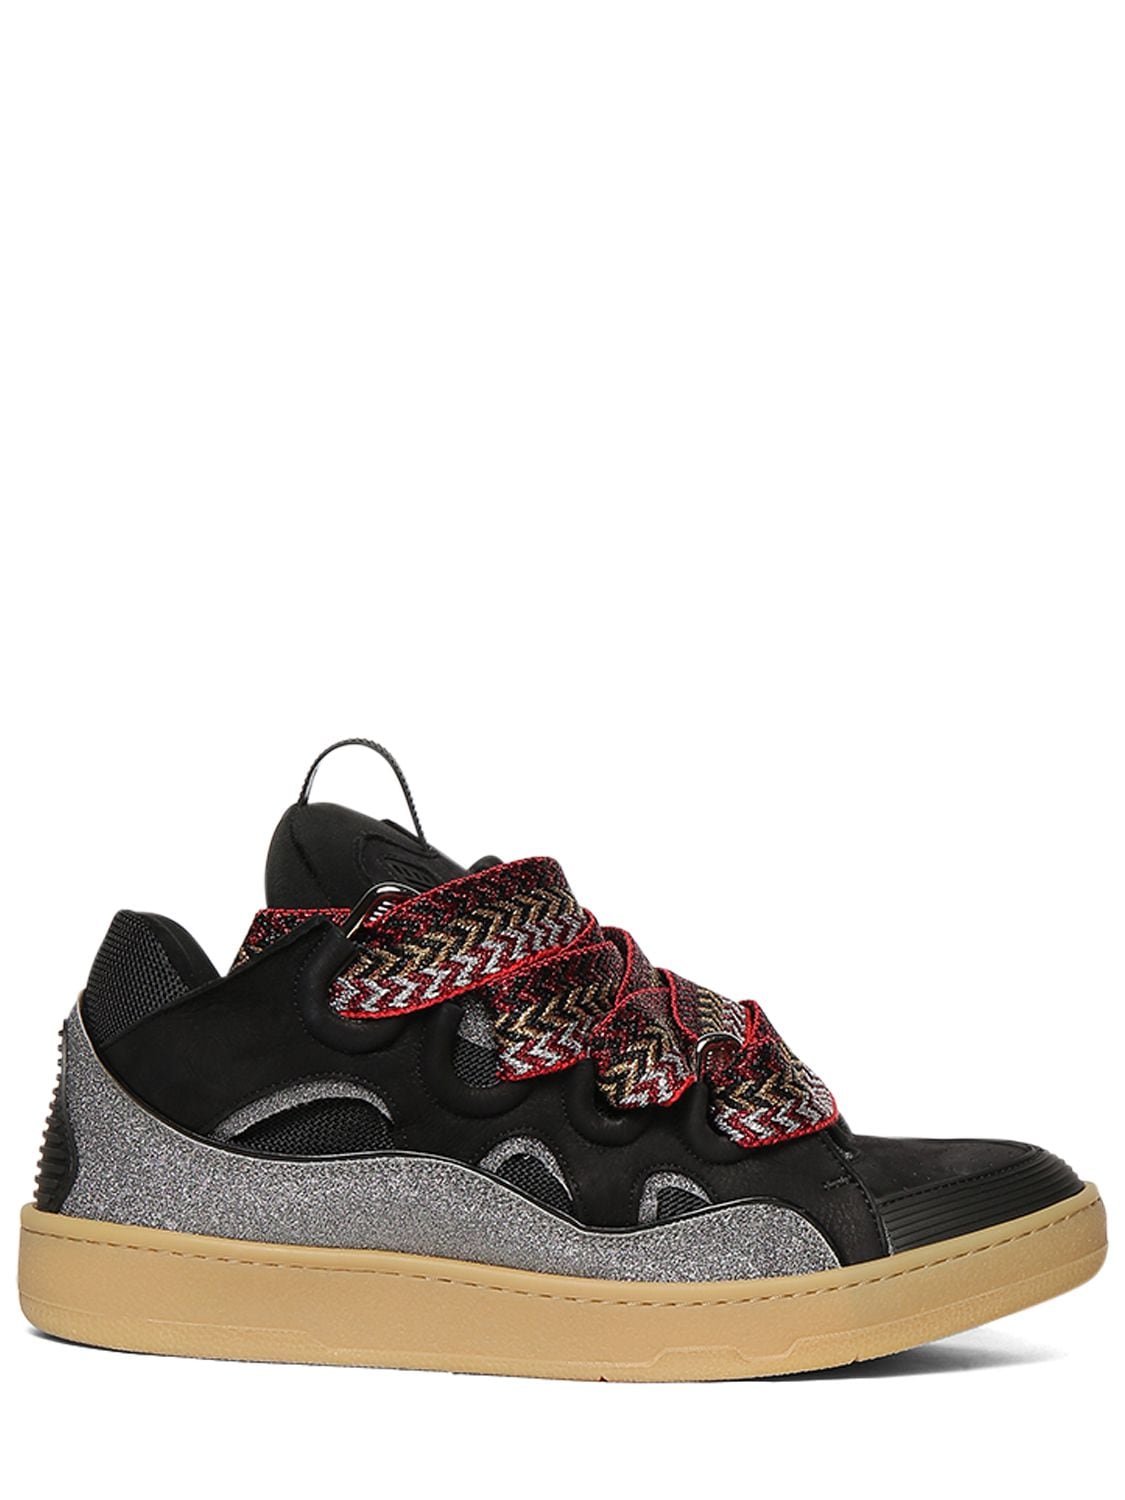 Lanvin Curb Glitter Leather Sneakers In Black